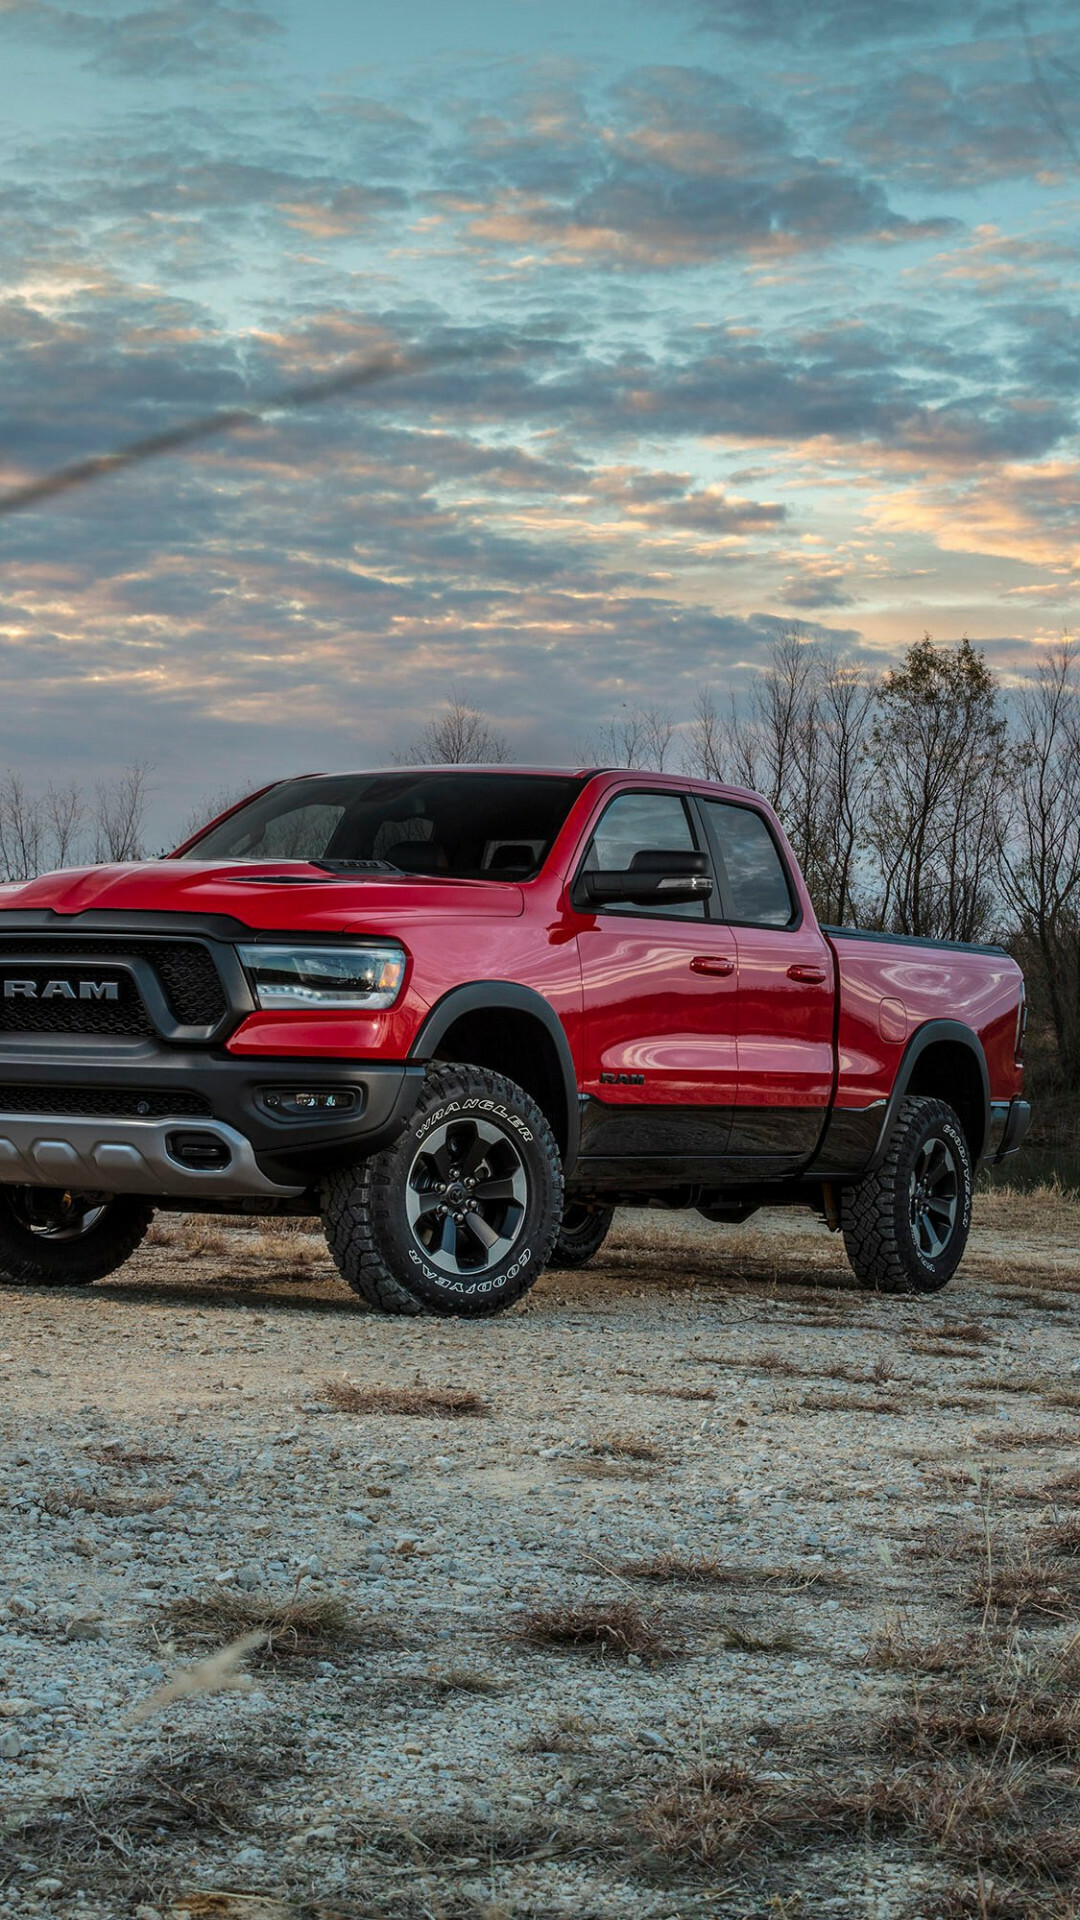 Ram Pickup: 1500 model, Previously, was part of the Dodge line of light trucks. 1080x1920 Full HD Wallpaper.